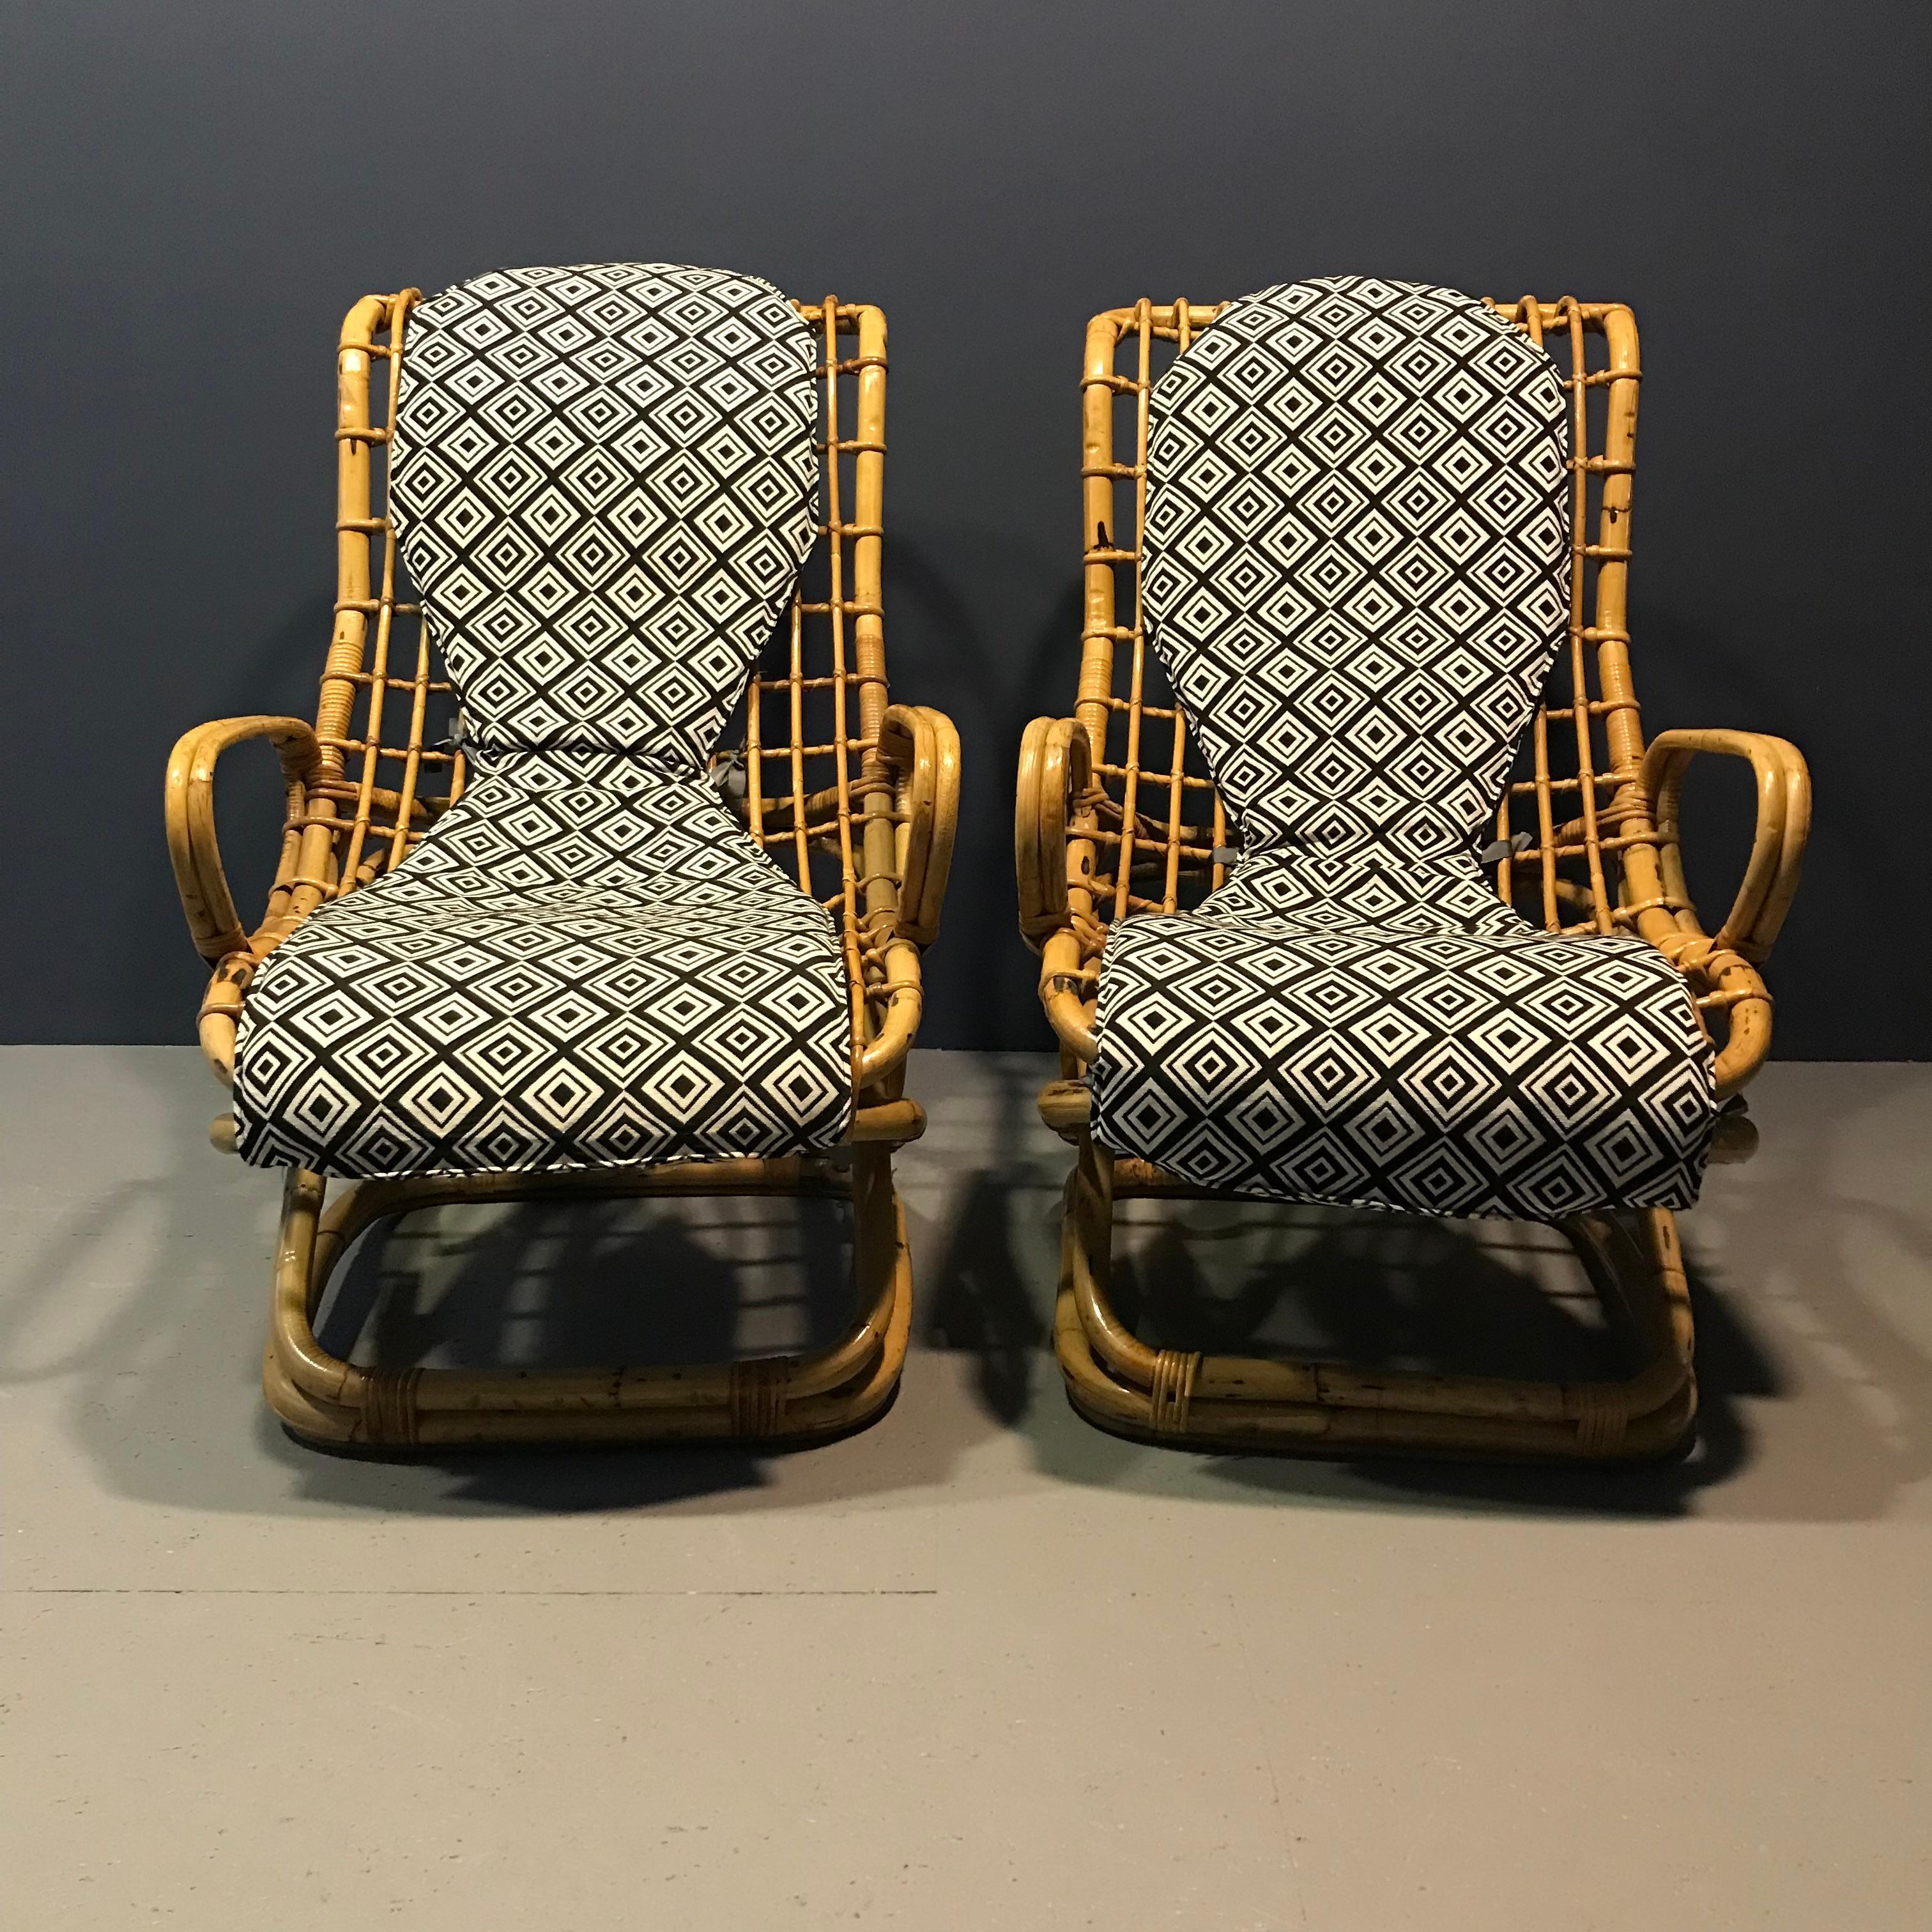 Mid-century Italian design wicker lounge chairs with matching oval table. The original cushions of the chairs have been given a new look with geometric fabric. Very comfortable, light and airy.
Table measures: H: 49cm W: 150cm D: 61cm